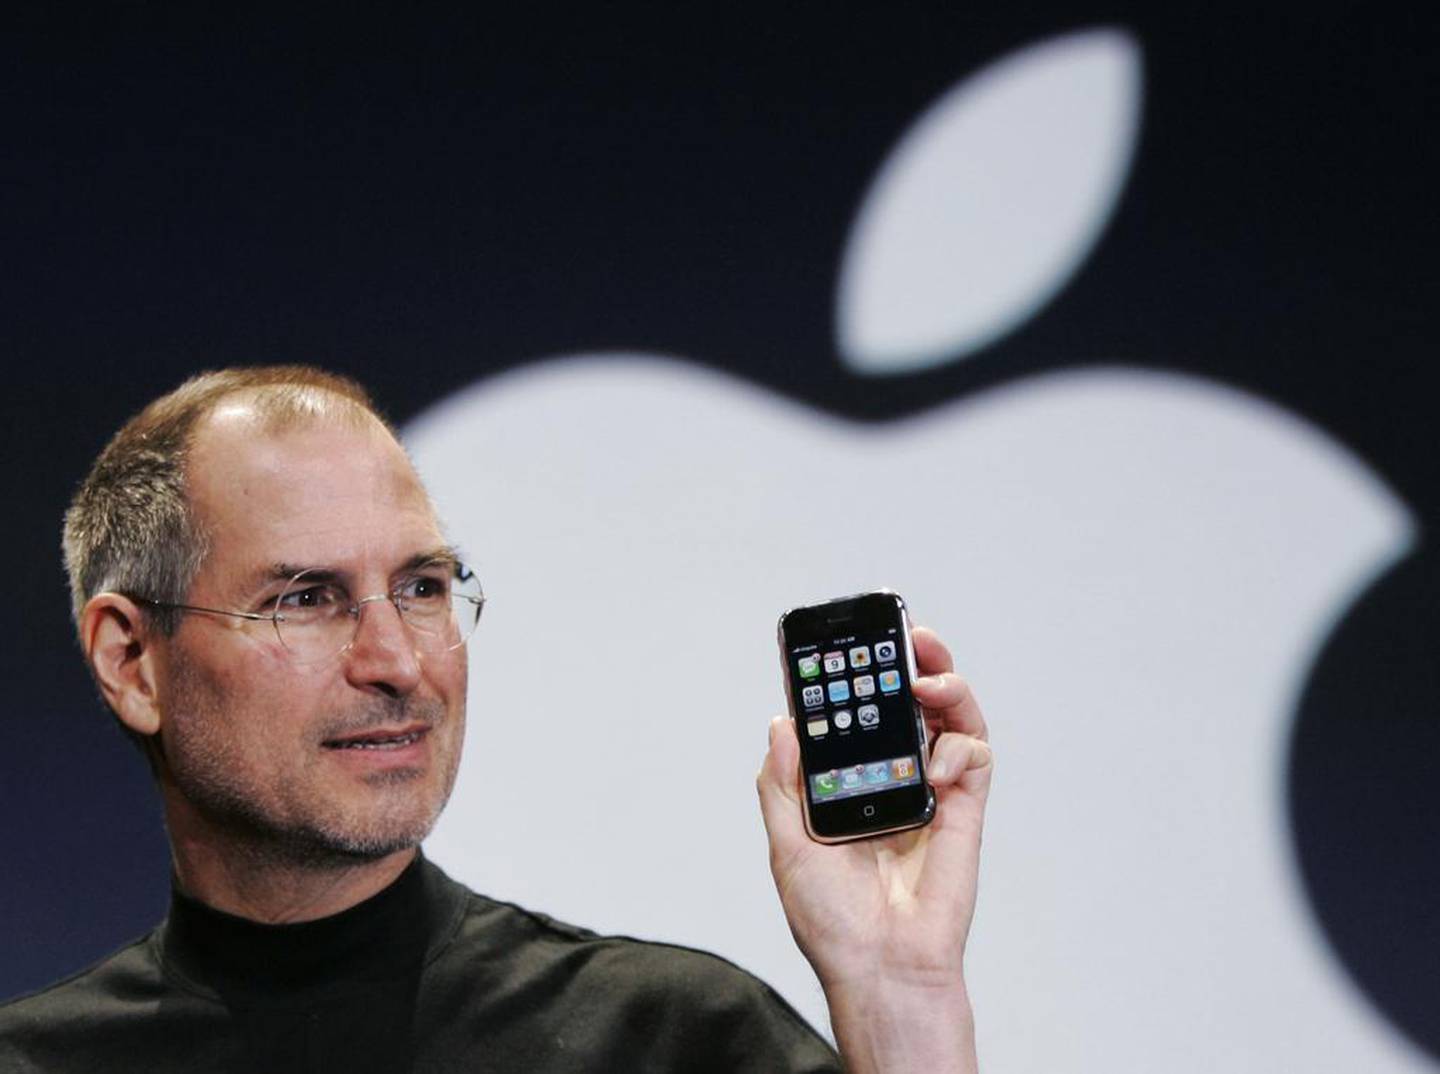 Steve Jobs with the original Apple iPhone at the MacWorld conference in San Francisco on January 9, 2007. AP